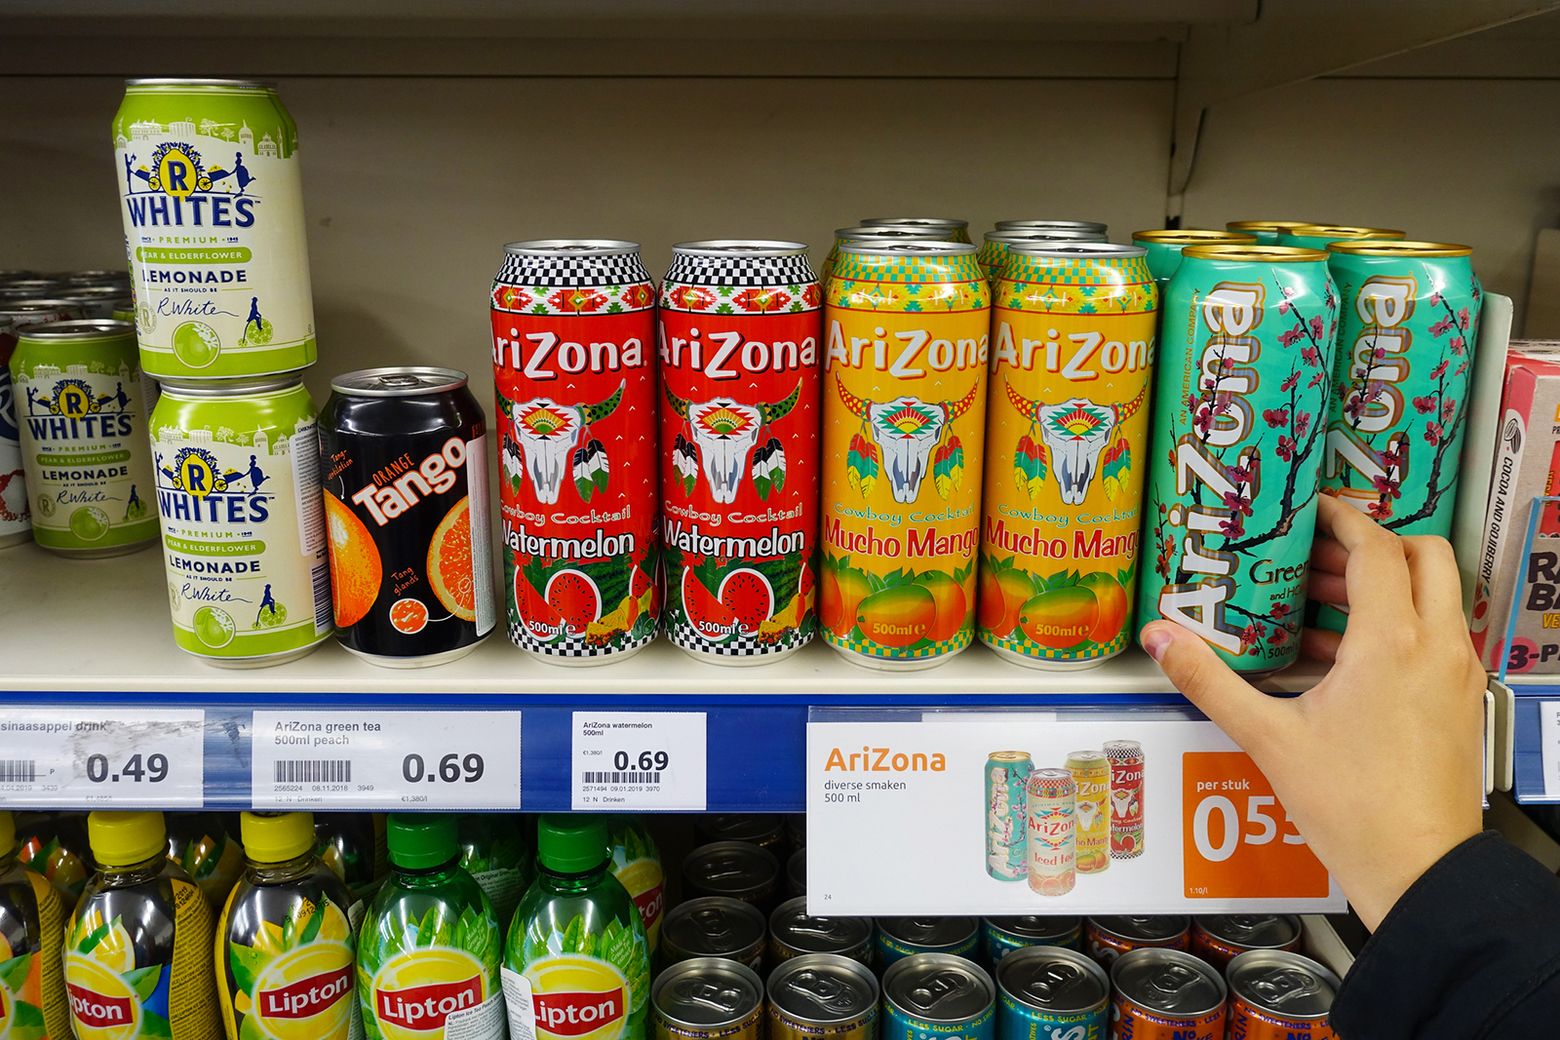 As inflation soars, how is AriZona iced tea still 99 cents?